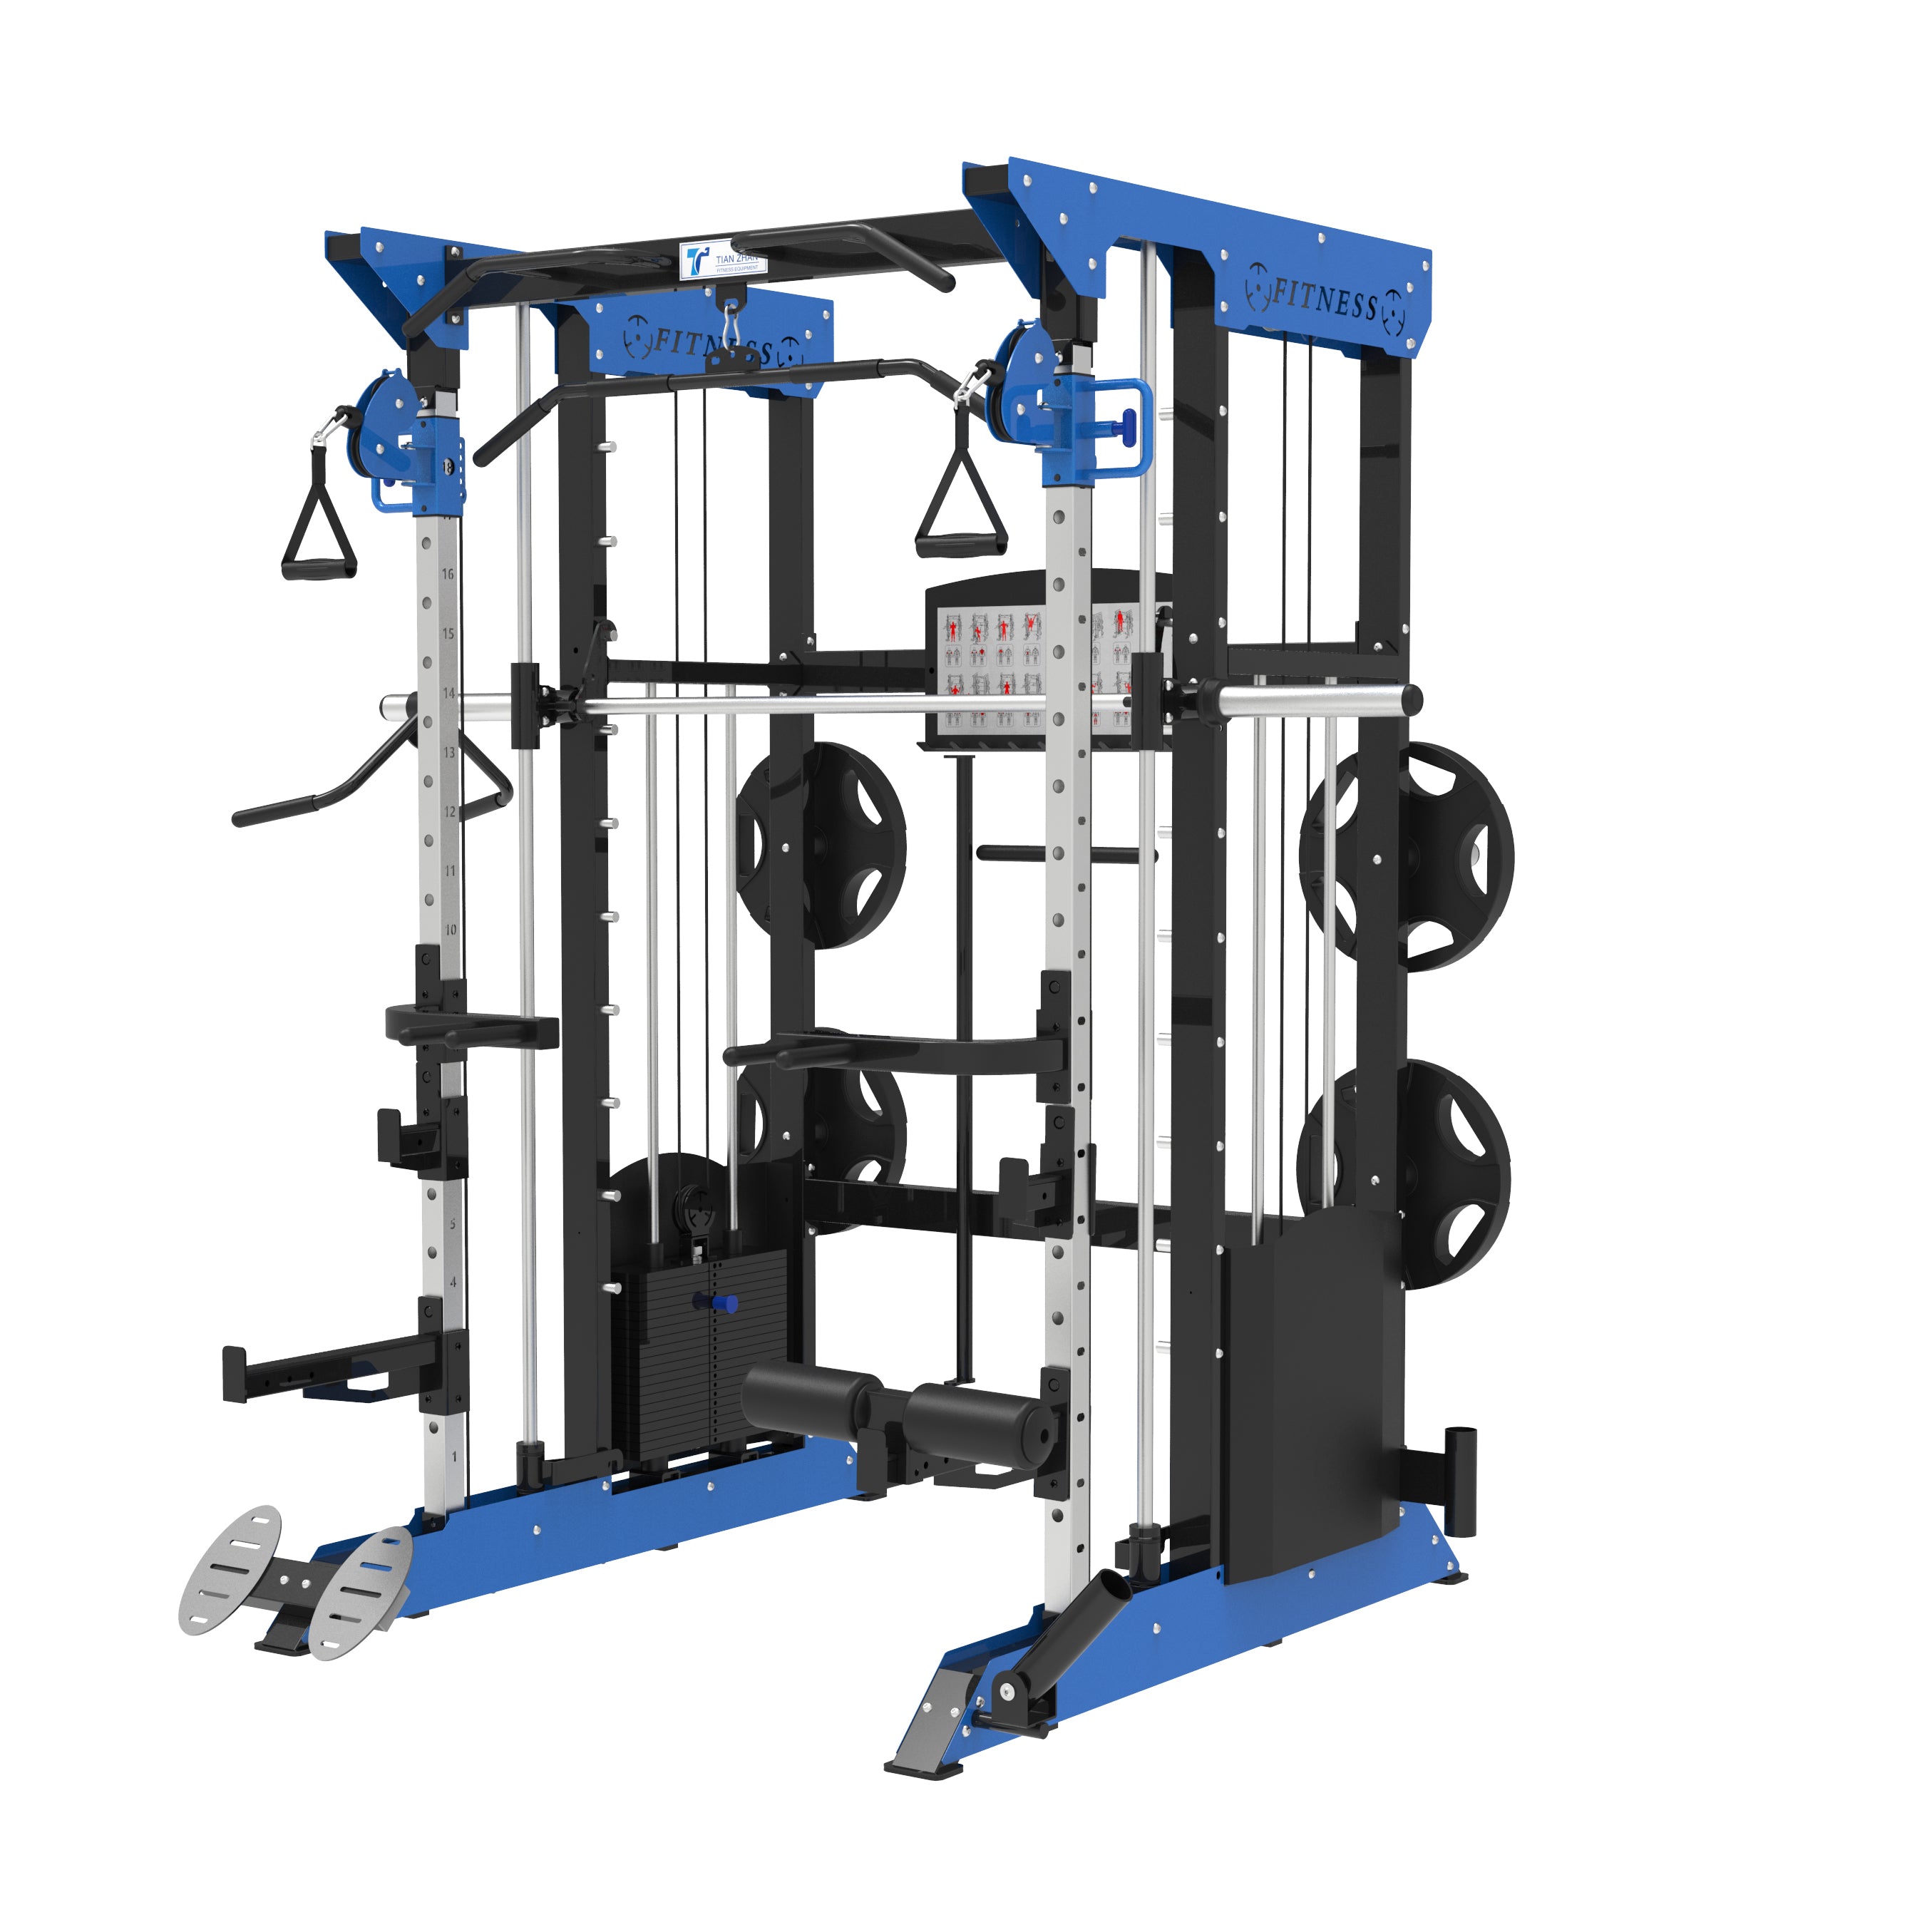 SFE Multi-Functional Trainer / Smith Machine Home Gym w/ (2) 200lb weight stacks (NEW)